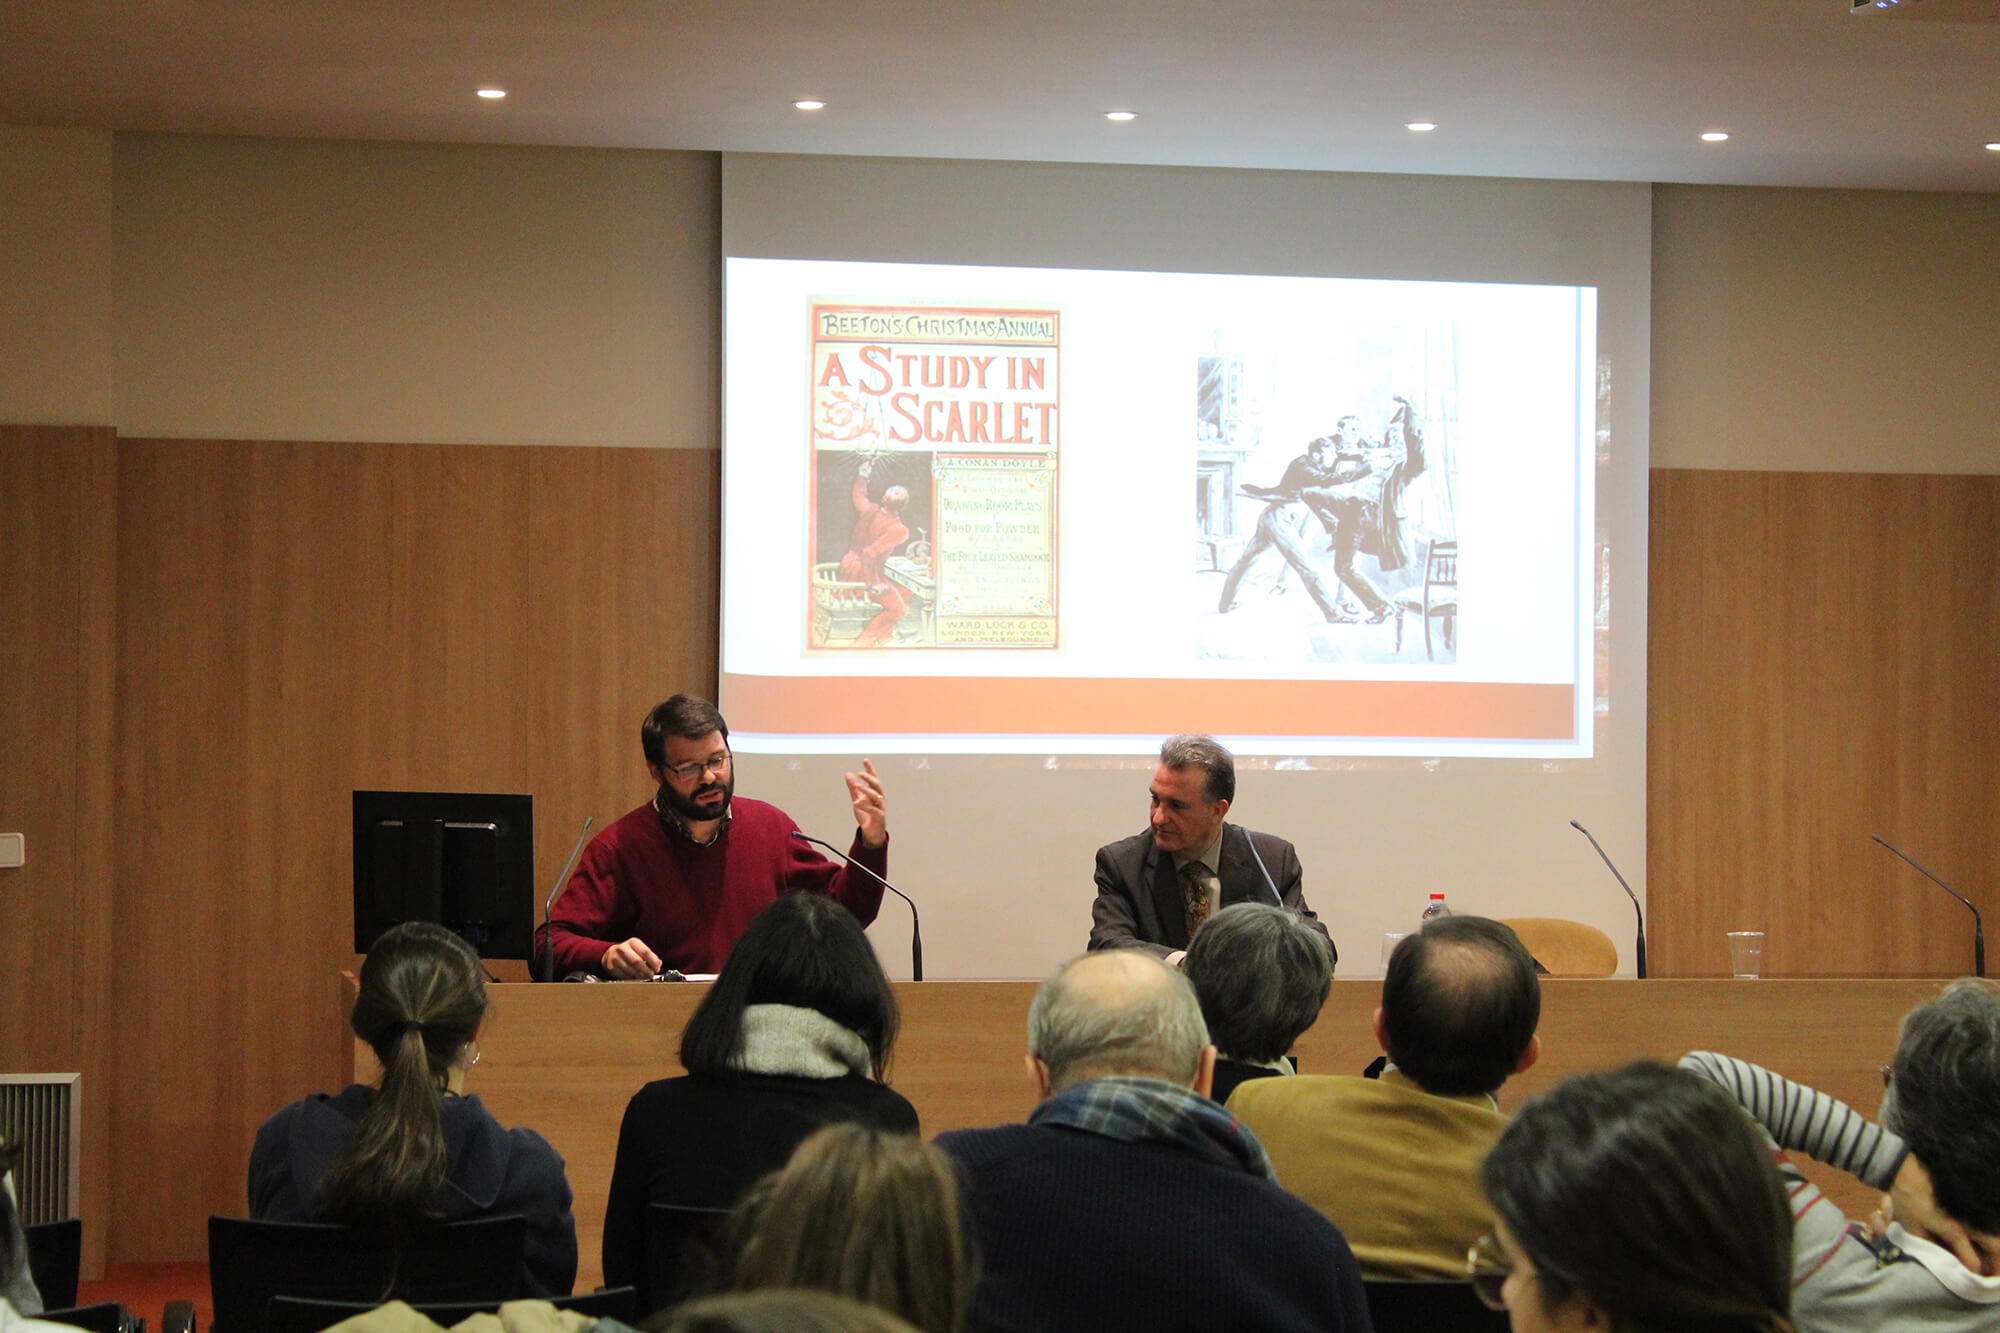 Josep Lluís Martín, holder of a PhD in contemporary history. Lecture “Sherlock Holmes entre nosaltres”. UIC Barcelona, 29 January, 2019.